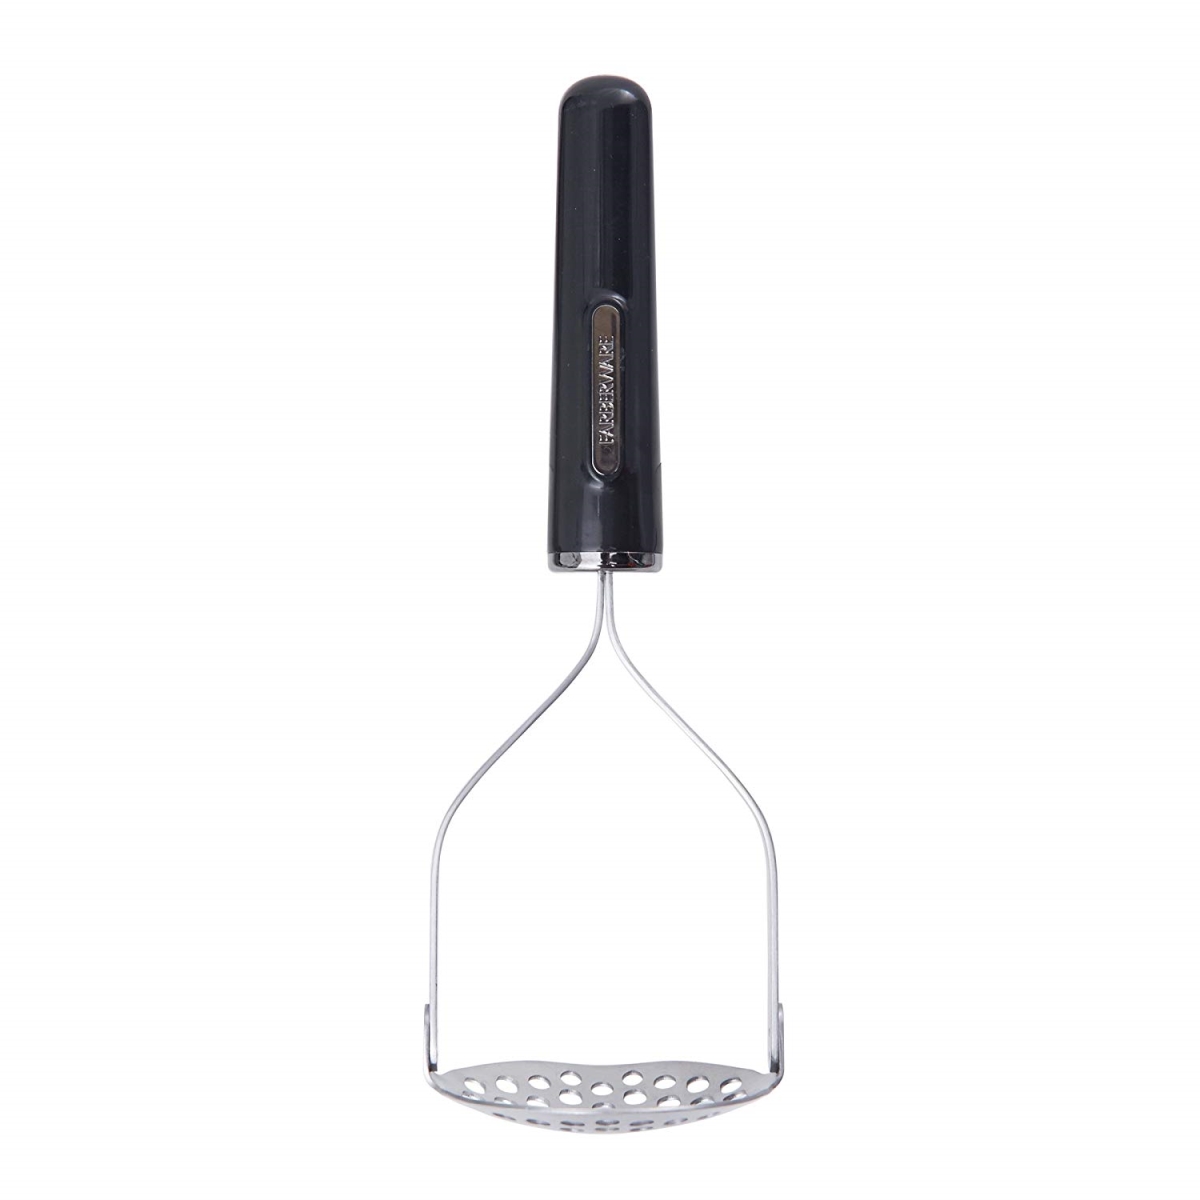 5211477 Blk Professional Stainless Steel Potato Masher, Black - Pack Of 3